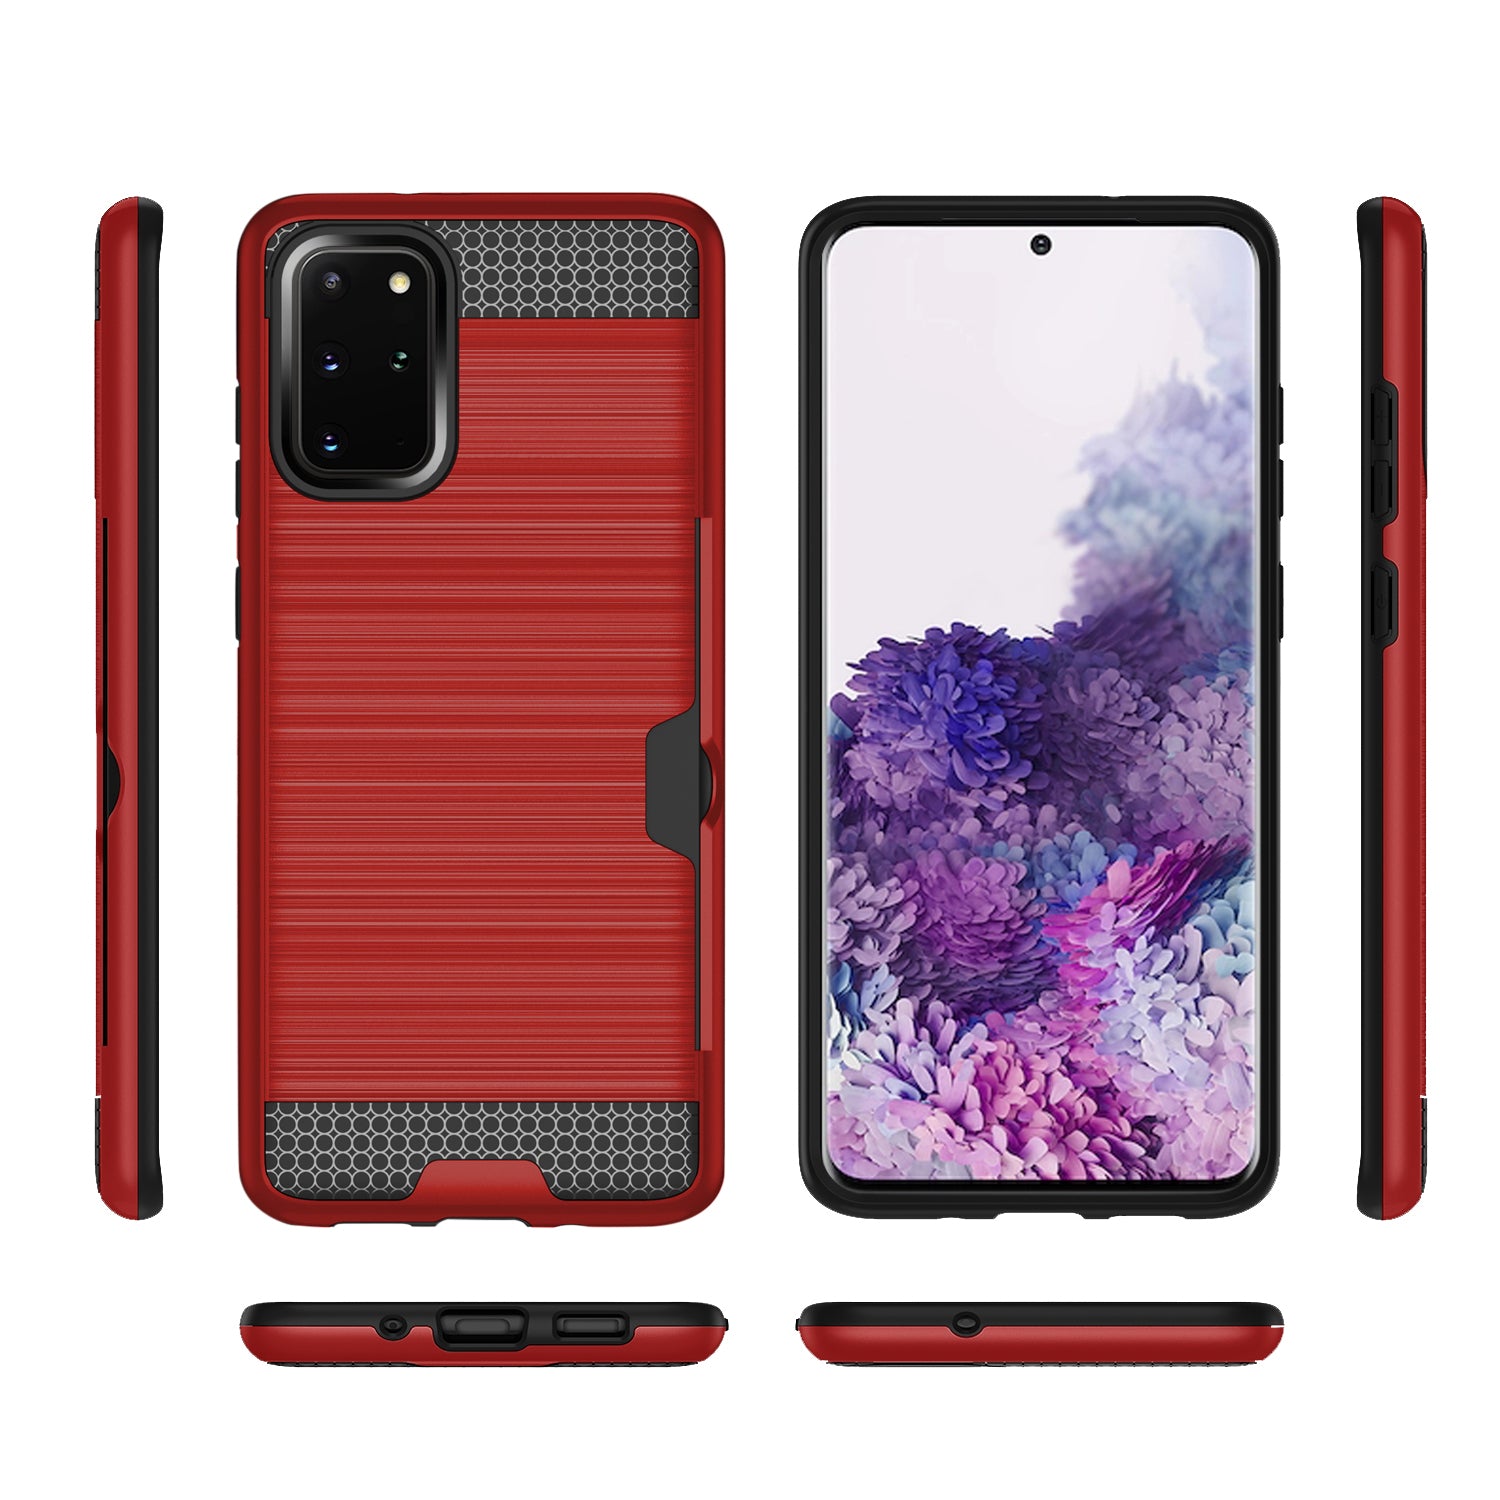 REIKO SAMSUNG GALAXY S20 PLUS SLIM ARMOR HYBRID CASE WITH CARD HOLDER IN RED